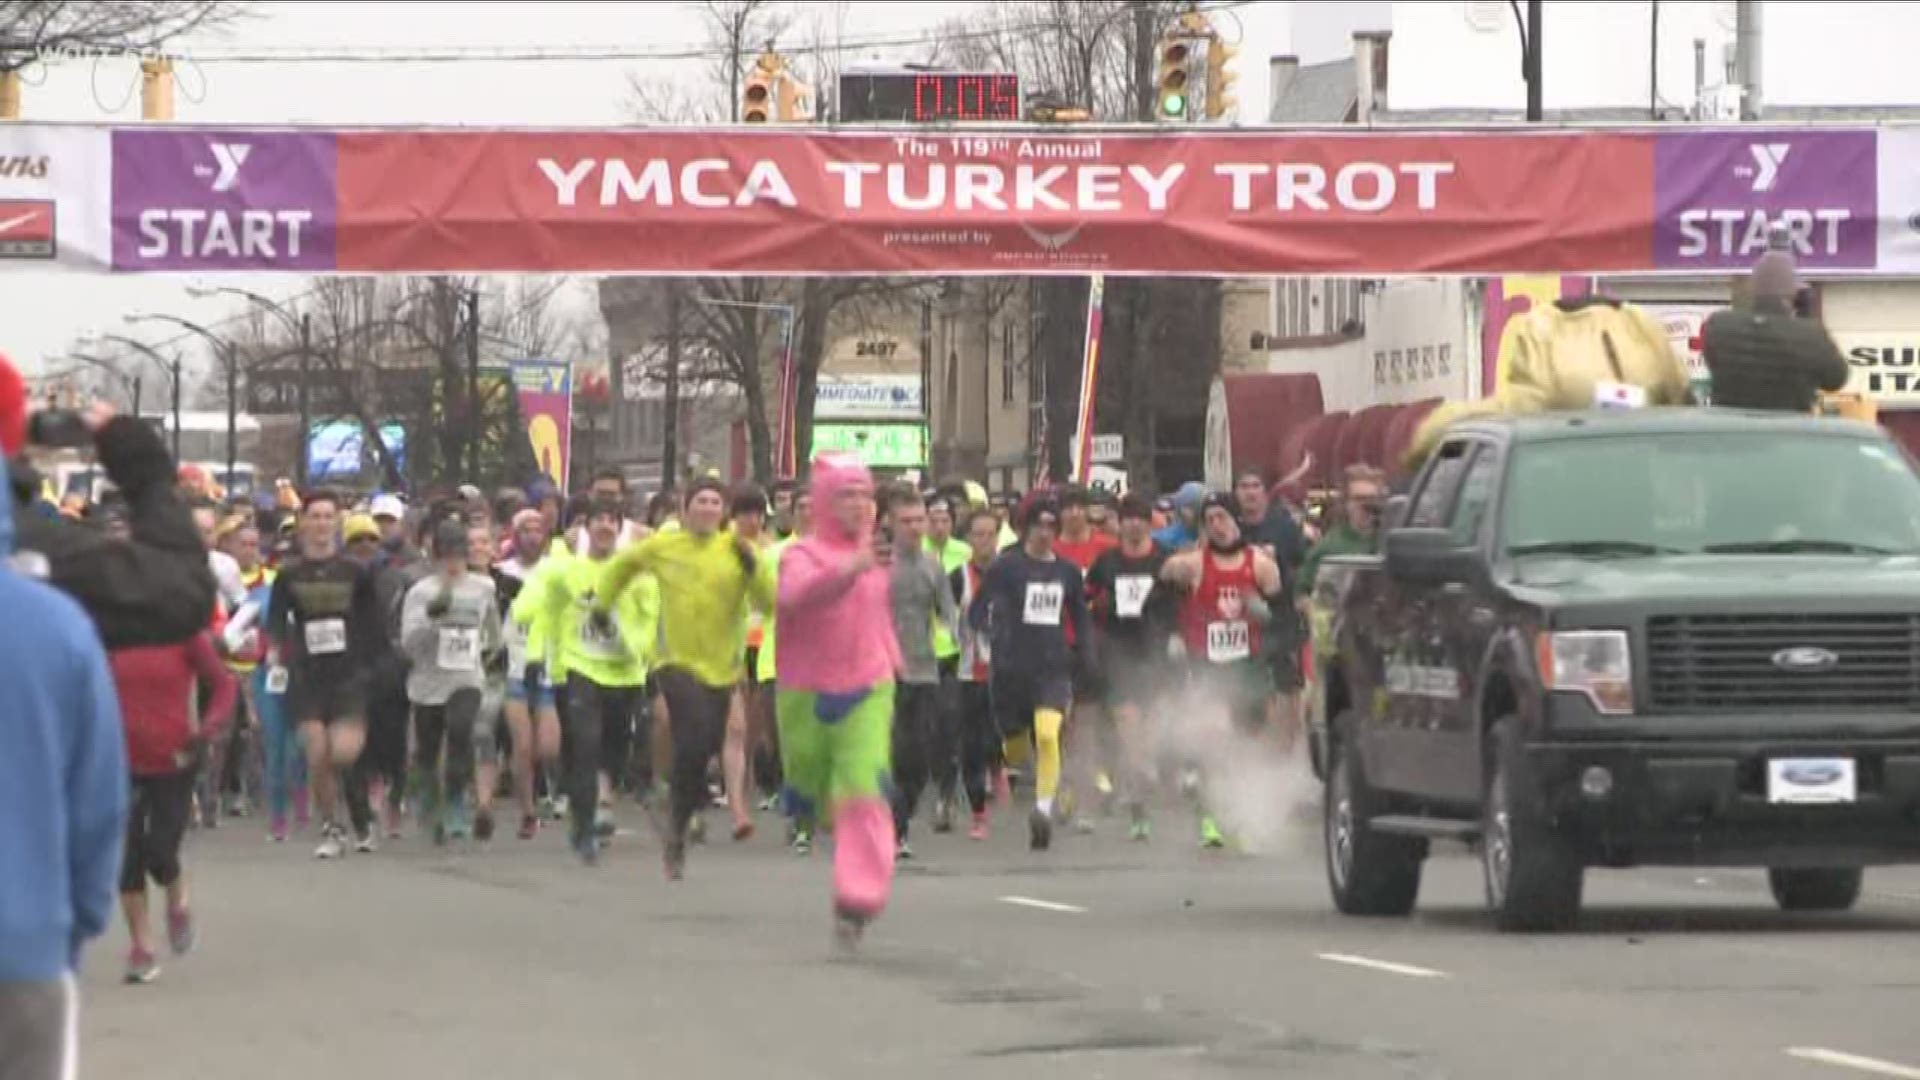 Less than 1000 spots left for turkey trot